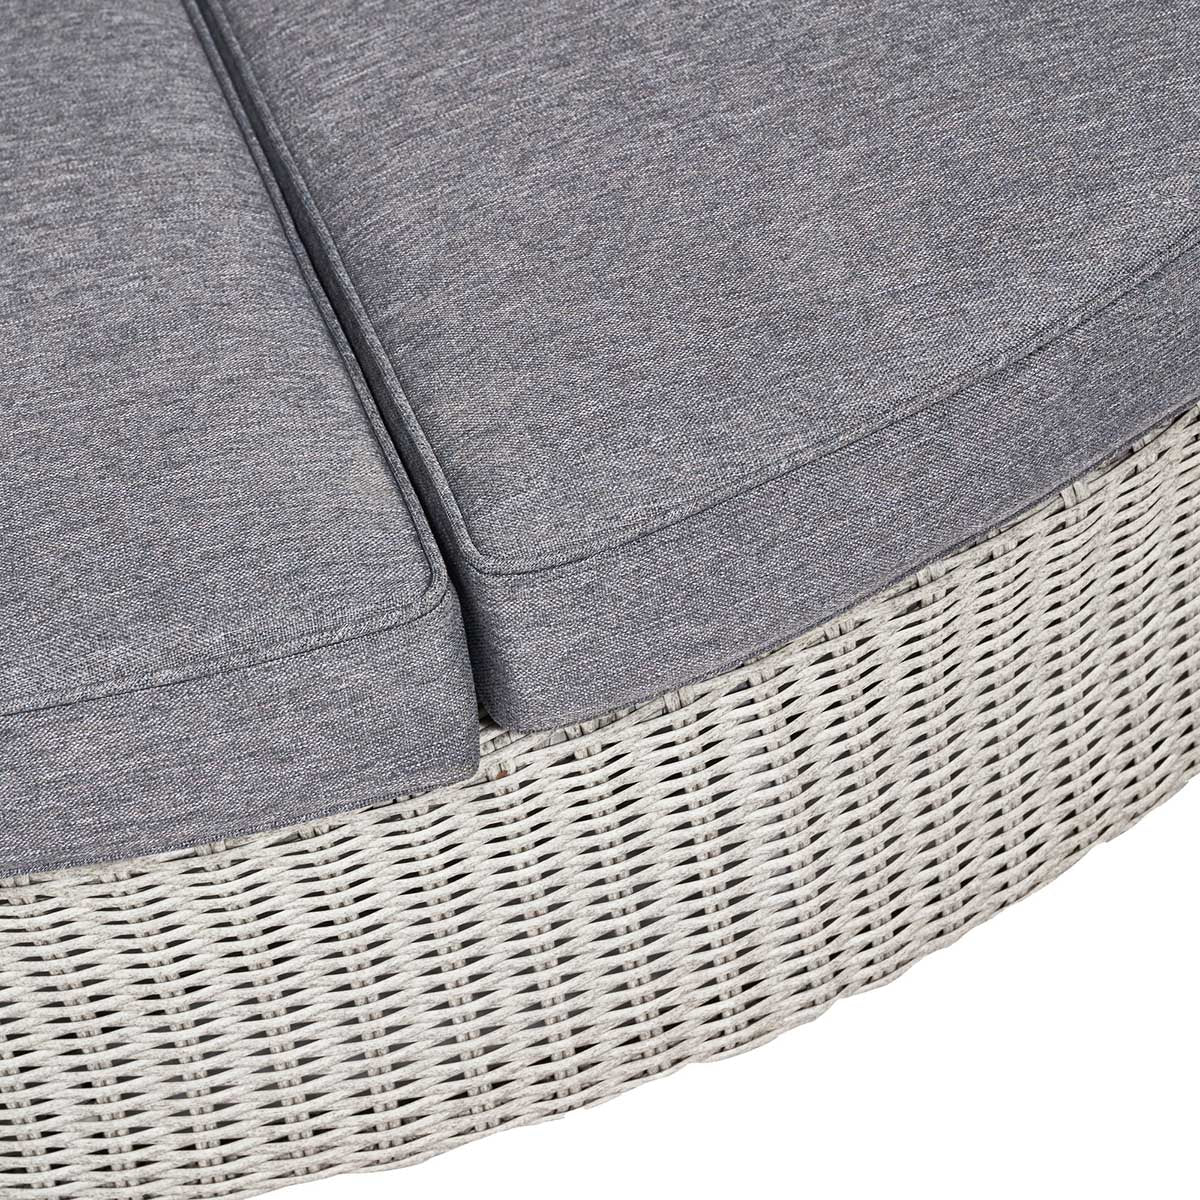 Avalonia Stone Grey Rattan Effect Round Garden Daybed with Canopy – Click Style